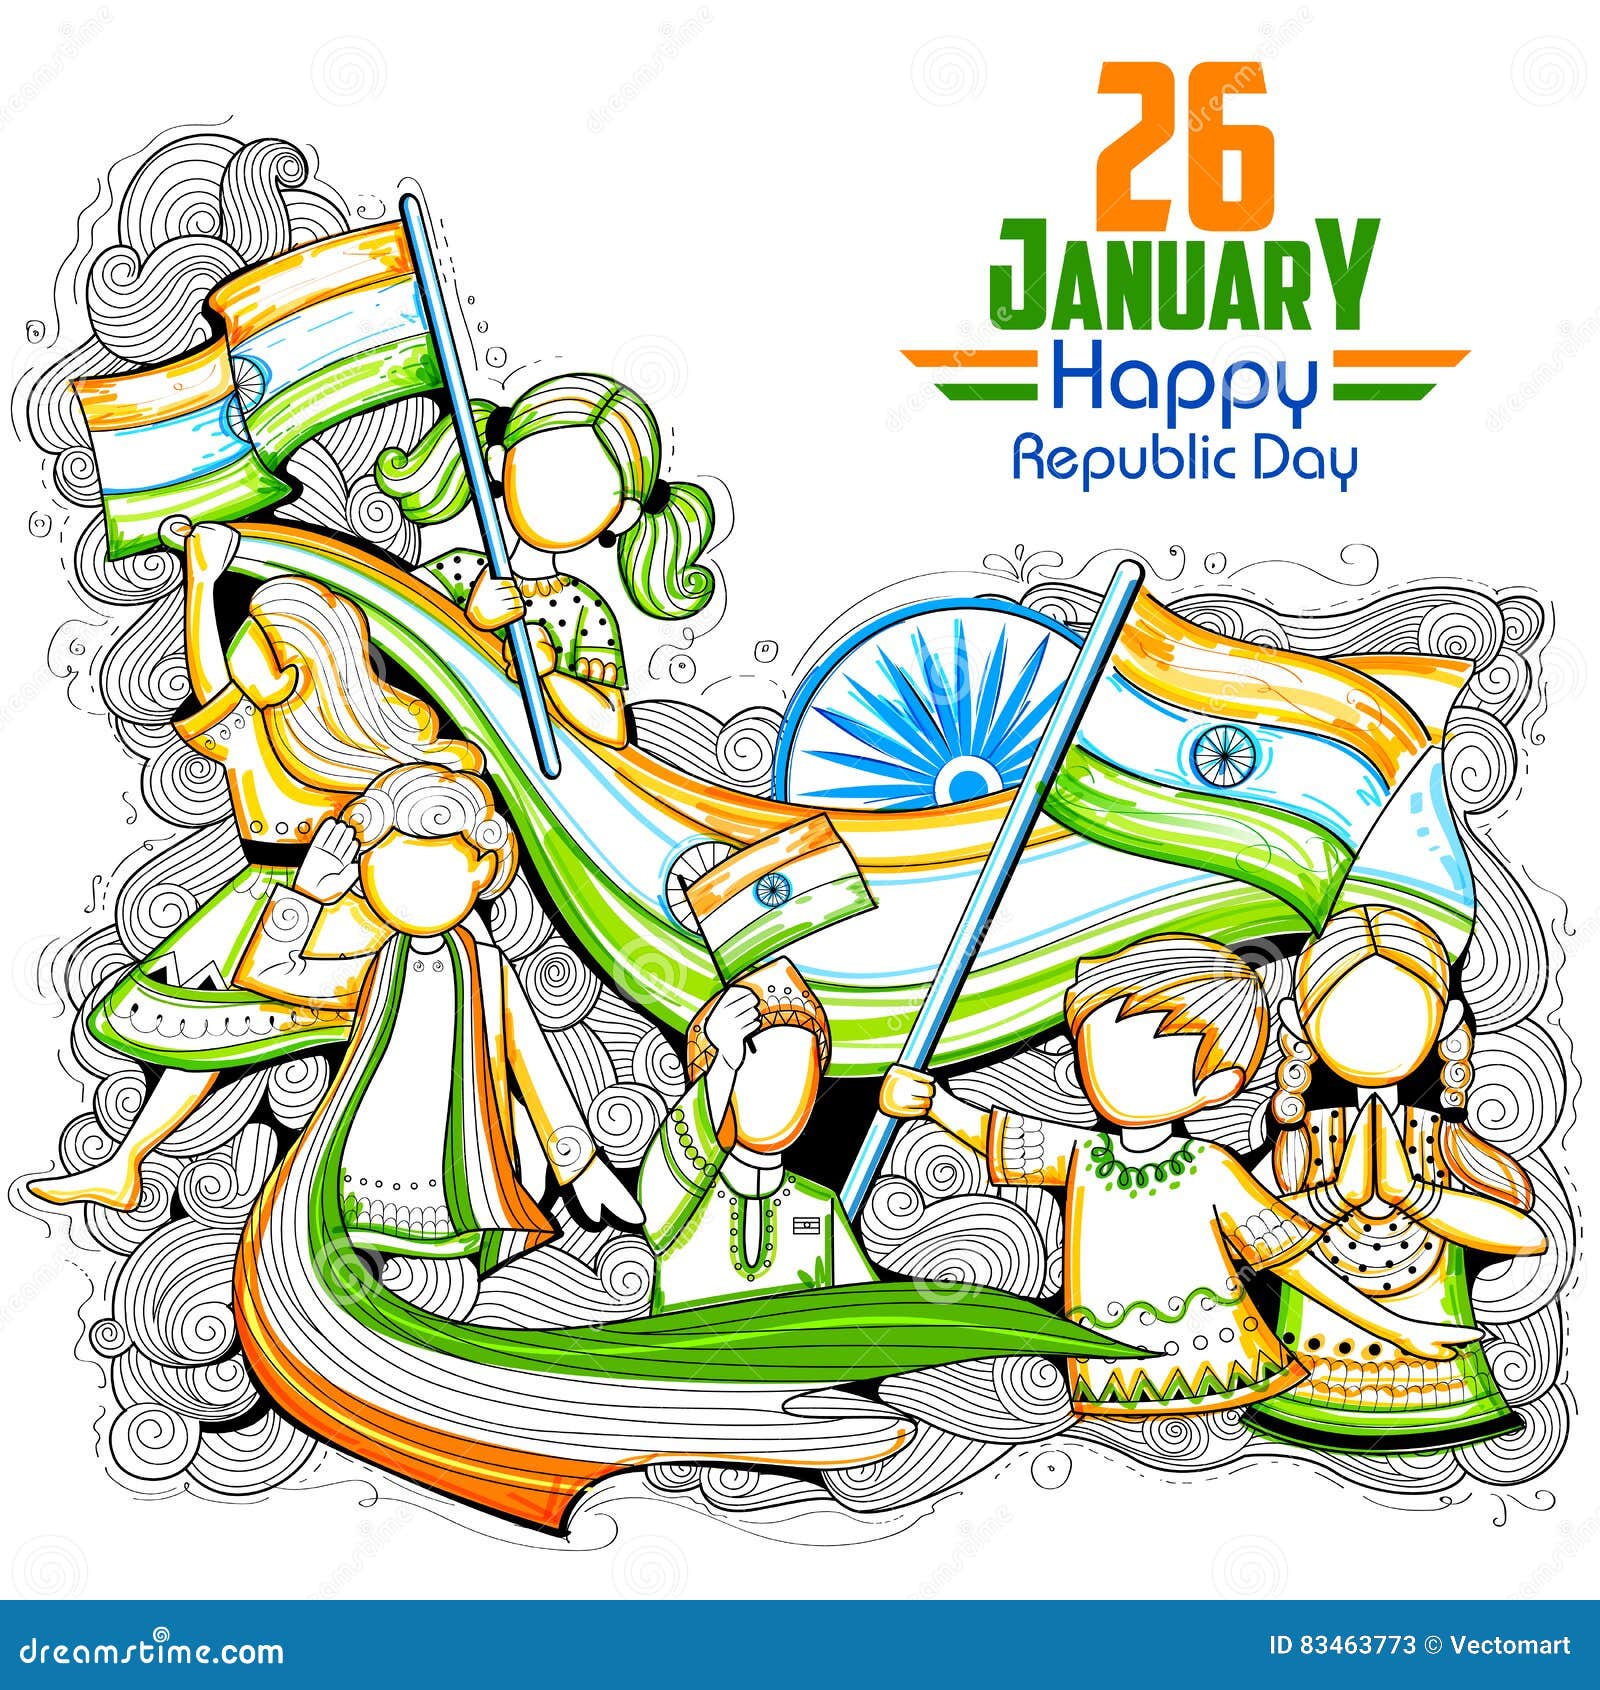 How to Draw REPUBLIC DAY Flag Drawing for kids by mlspcart on DeviantArt-saigonsouth.com.vn